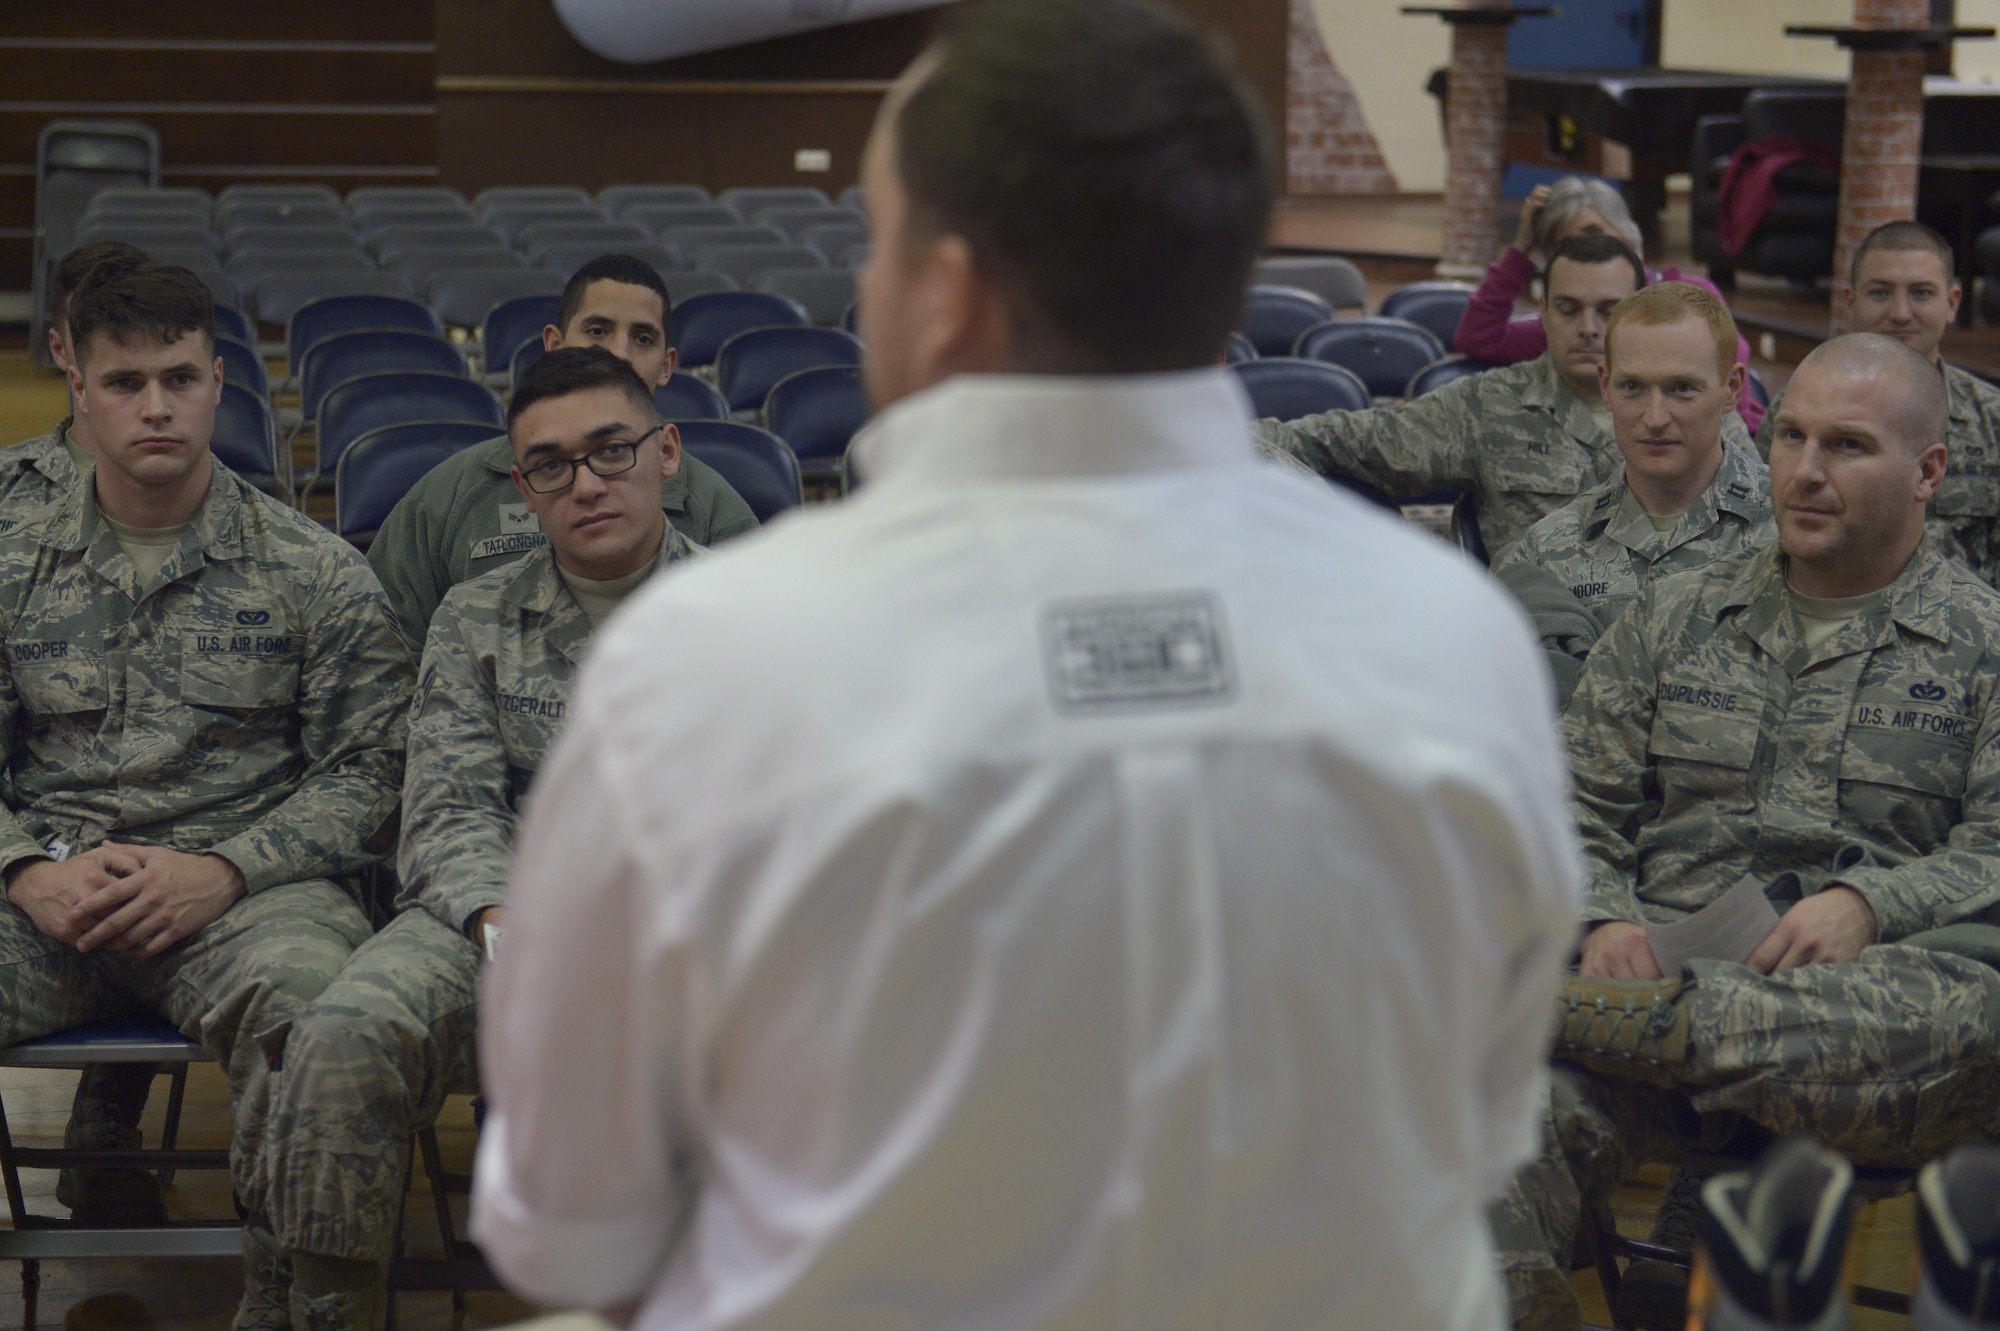 Benjamin Breckheimer, a former U.S. Army Staff Sgt., speaks to Airmen about personal resiliency at the Brick House on Spangdahlem Air Base, Germany, Nov. 10, 2016. Breackheimer spoke about the importance of resiliency and his successful summit of Mount Elbrus following years of physical therapy. (U.S. Air Force photo by Staff Sgt. Jonathan Snyder)